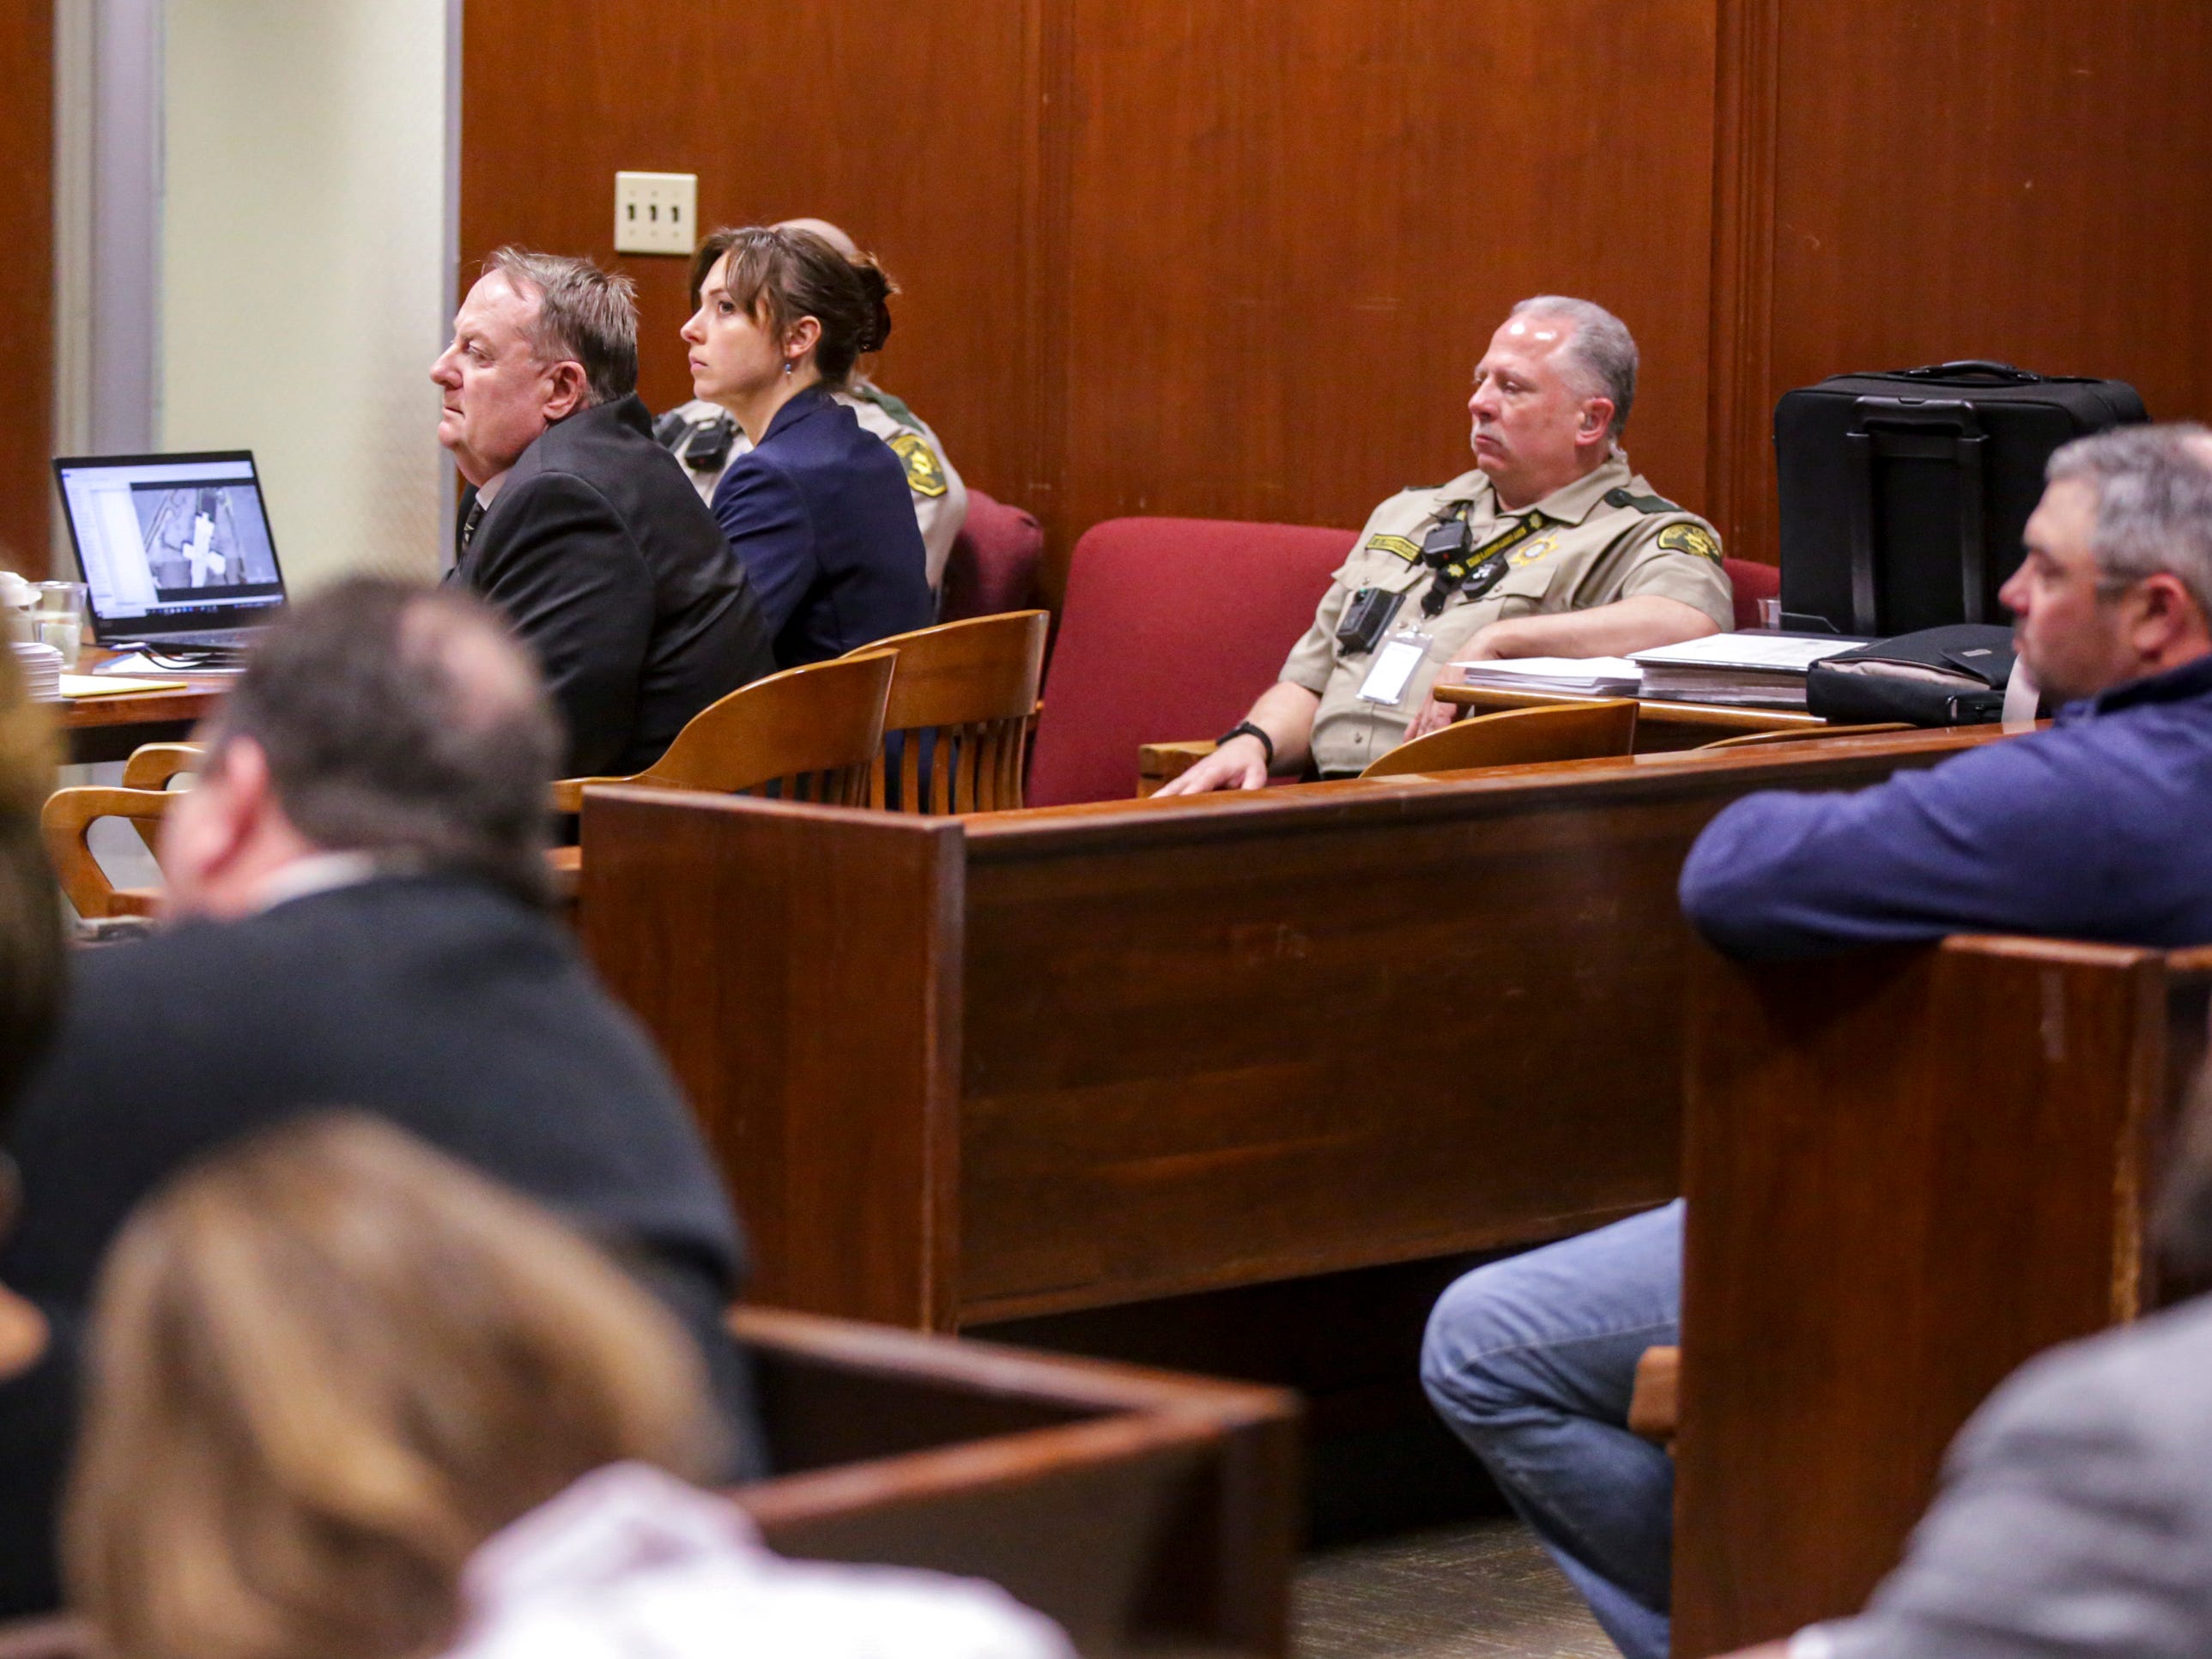 Defendant Jerry Burns listens to testimony from witness Todd Bergen of Cedar Rapids during his trial at the Scott County Courthouse in Davenport on Wednesday, Feb. 12, 2020.